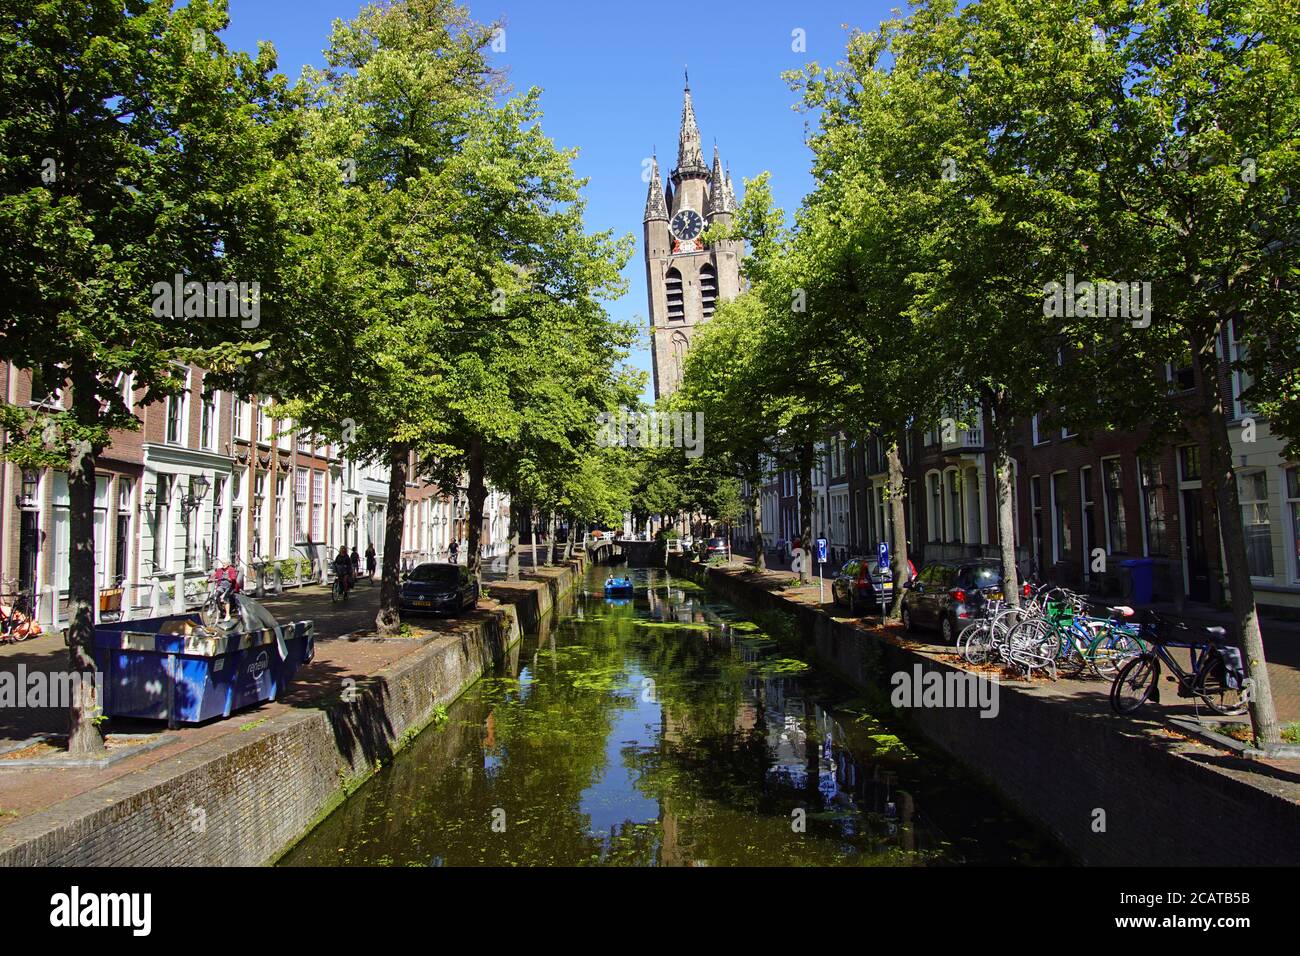 The Oude Delft canal and leaning tower of Gothic Protestant Oude Kerk in the picturesque Dutch historical cit Stock Photo